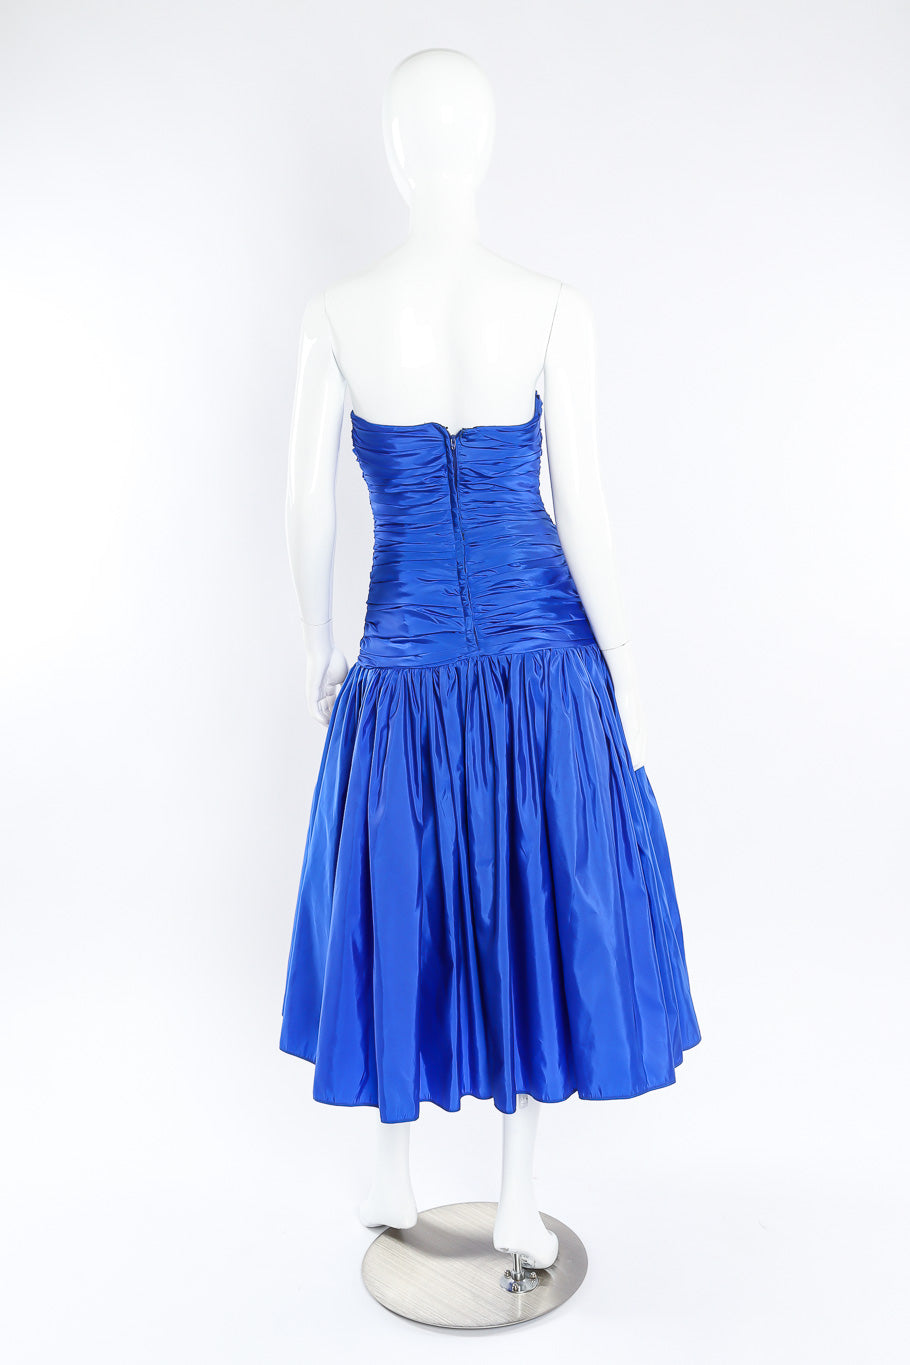 Strapless party dress by Victor Costa on mannequin back full @recessla